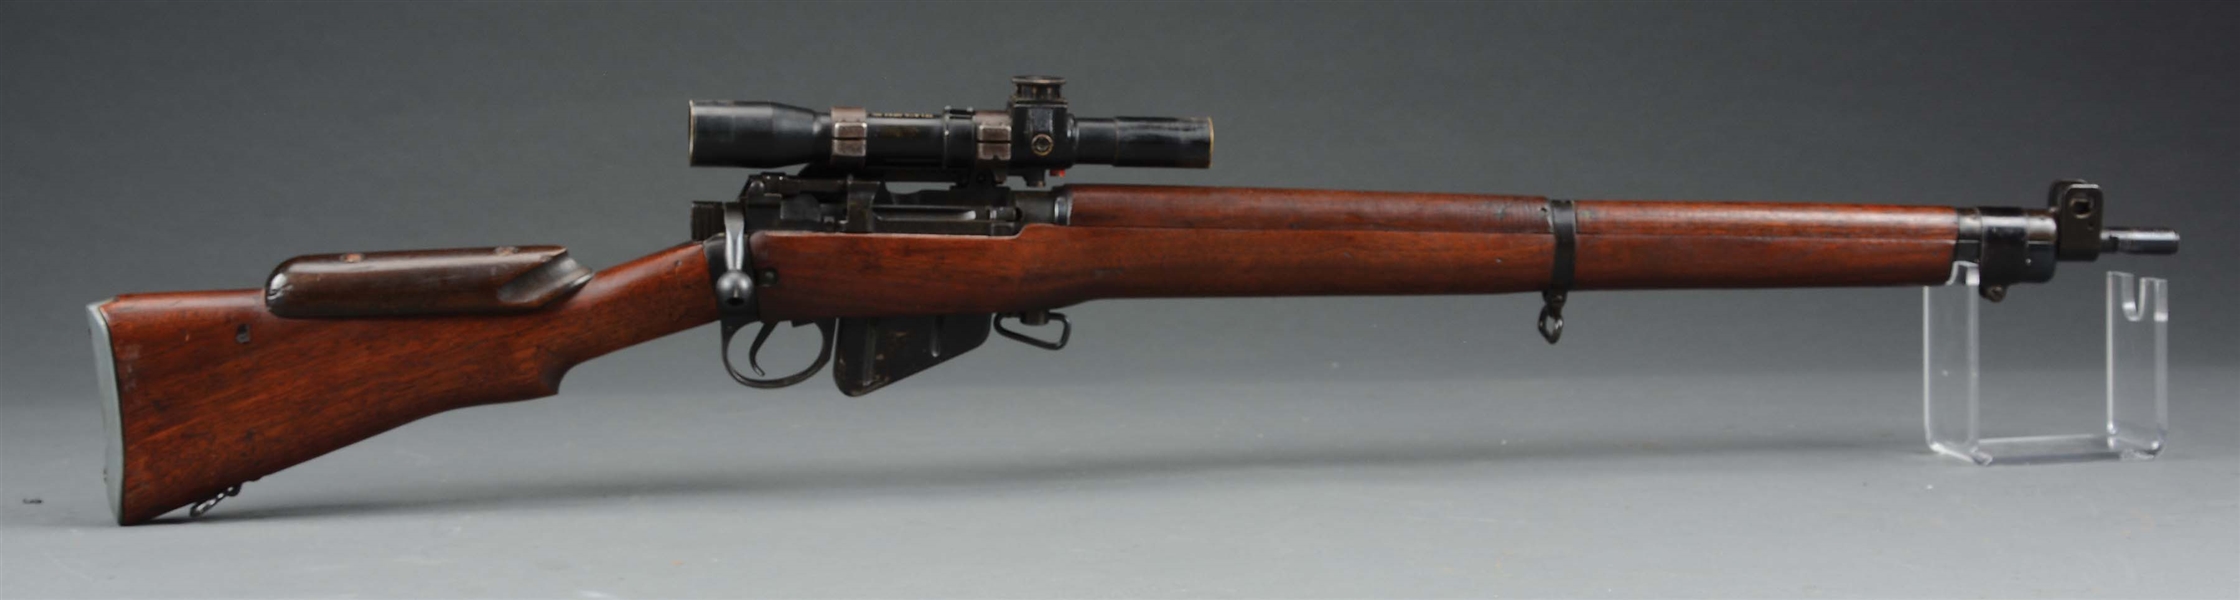 (C) CASED ENFIELD BOLT ACTION SNIPER RIFLE.